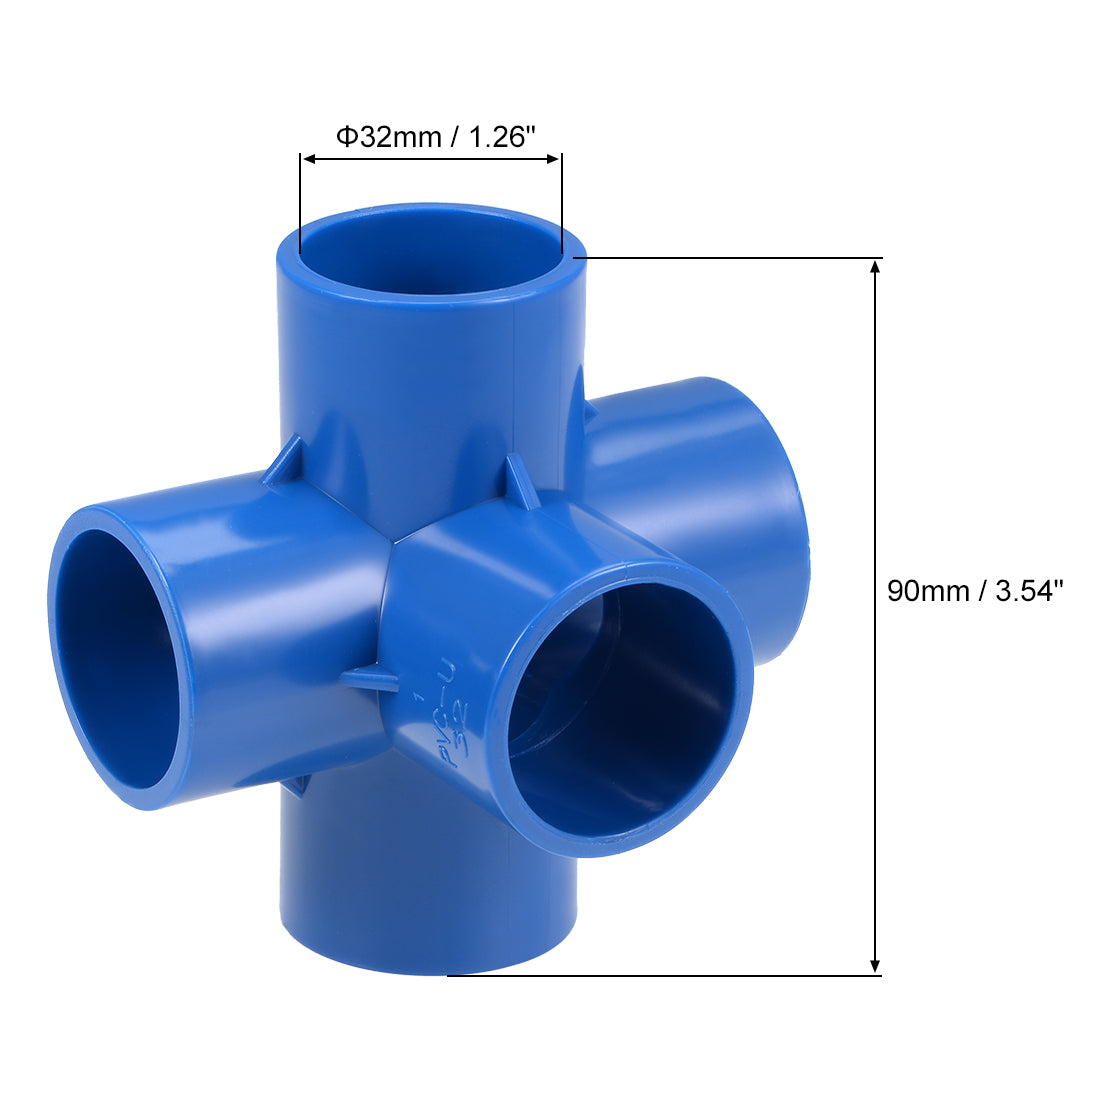 uxcell Uxcell 5 Way 32mm Tee Metric PVC Fitting Elbow - PVC Furniture Elbow Fittings Blue 5Pcs